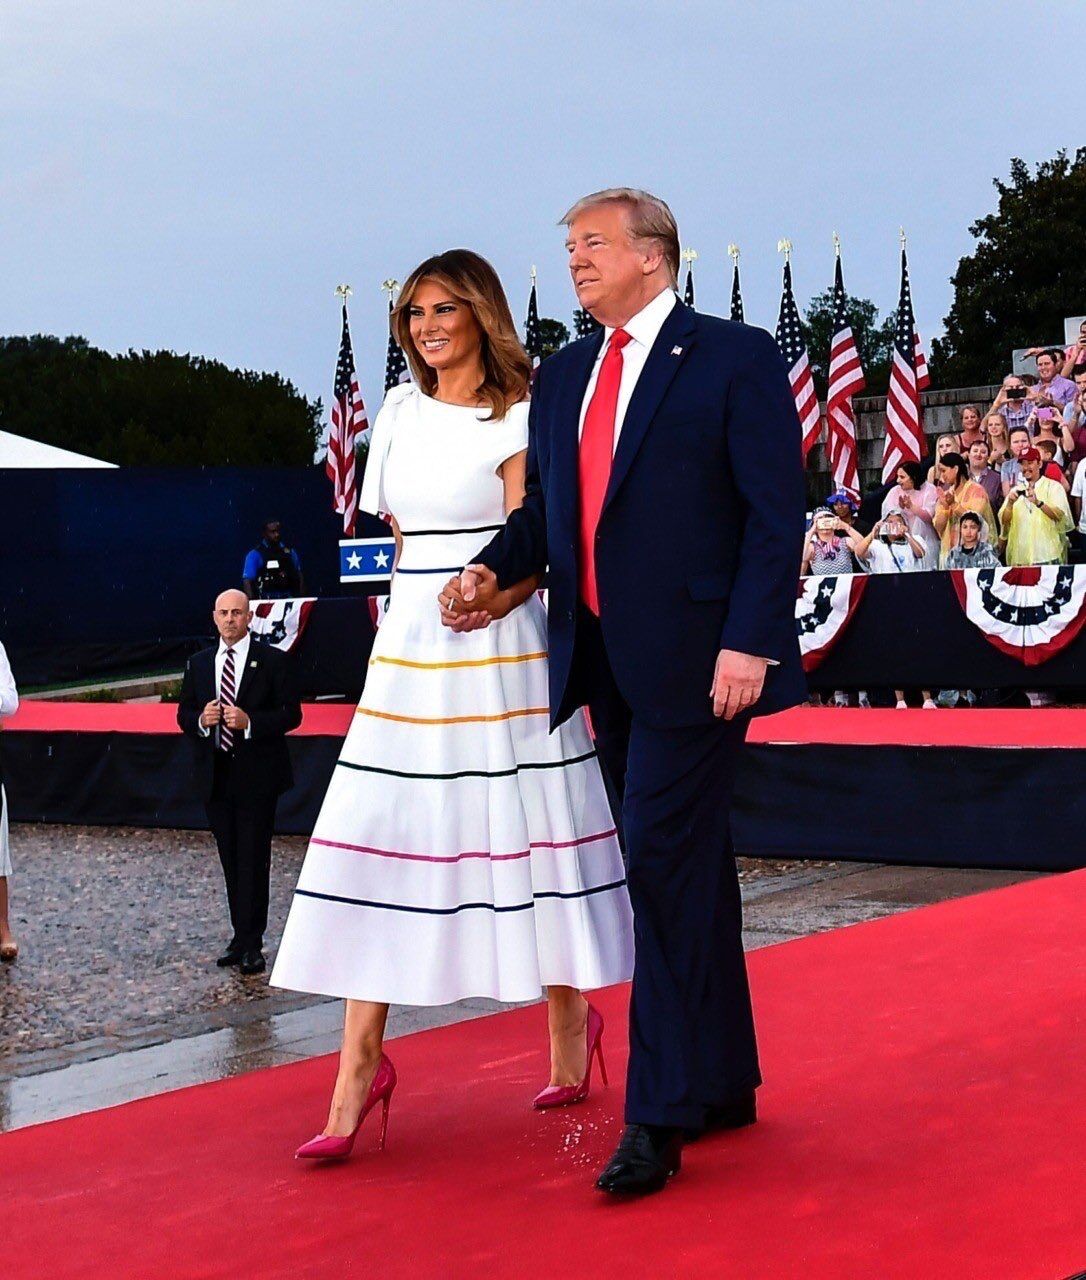 Was Melania Trump secretly celebrating Pride at the Fourth of July parade?